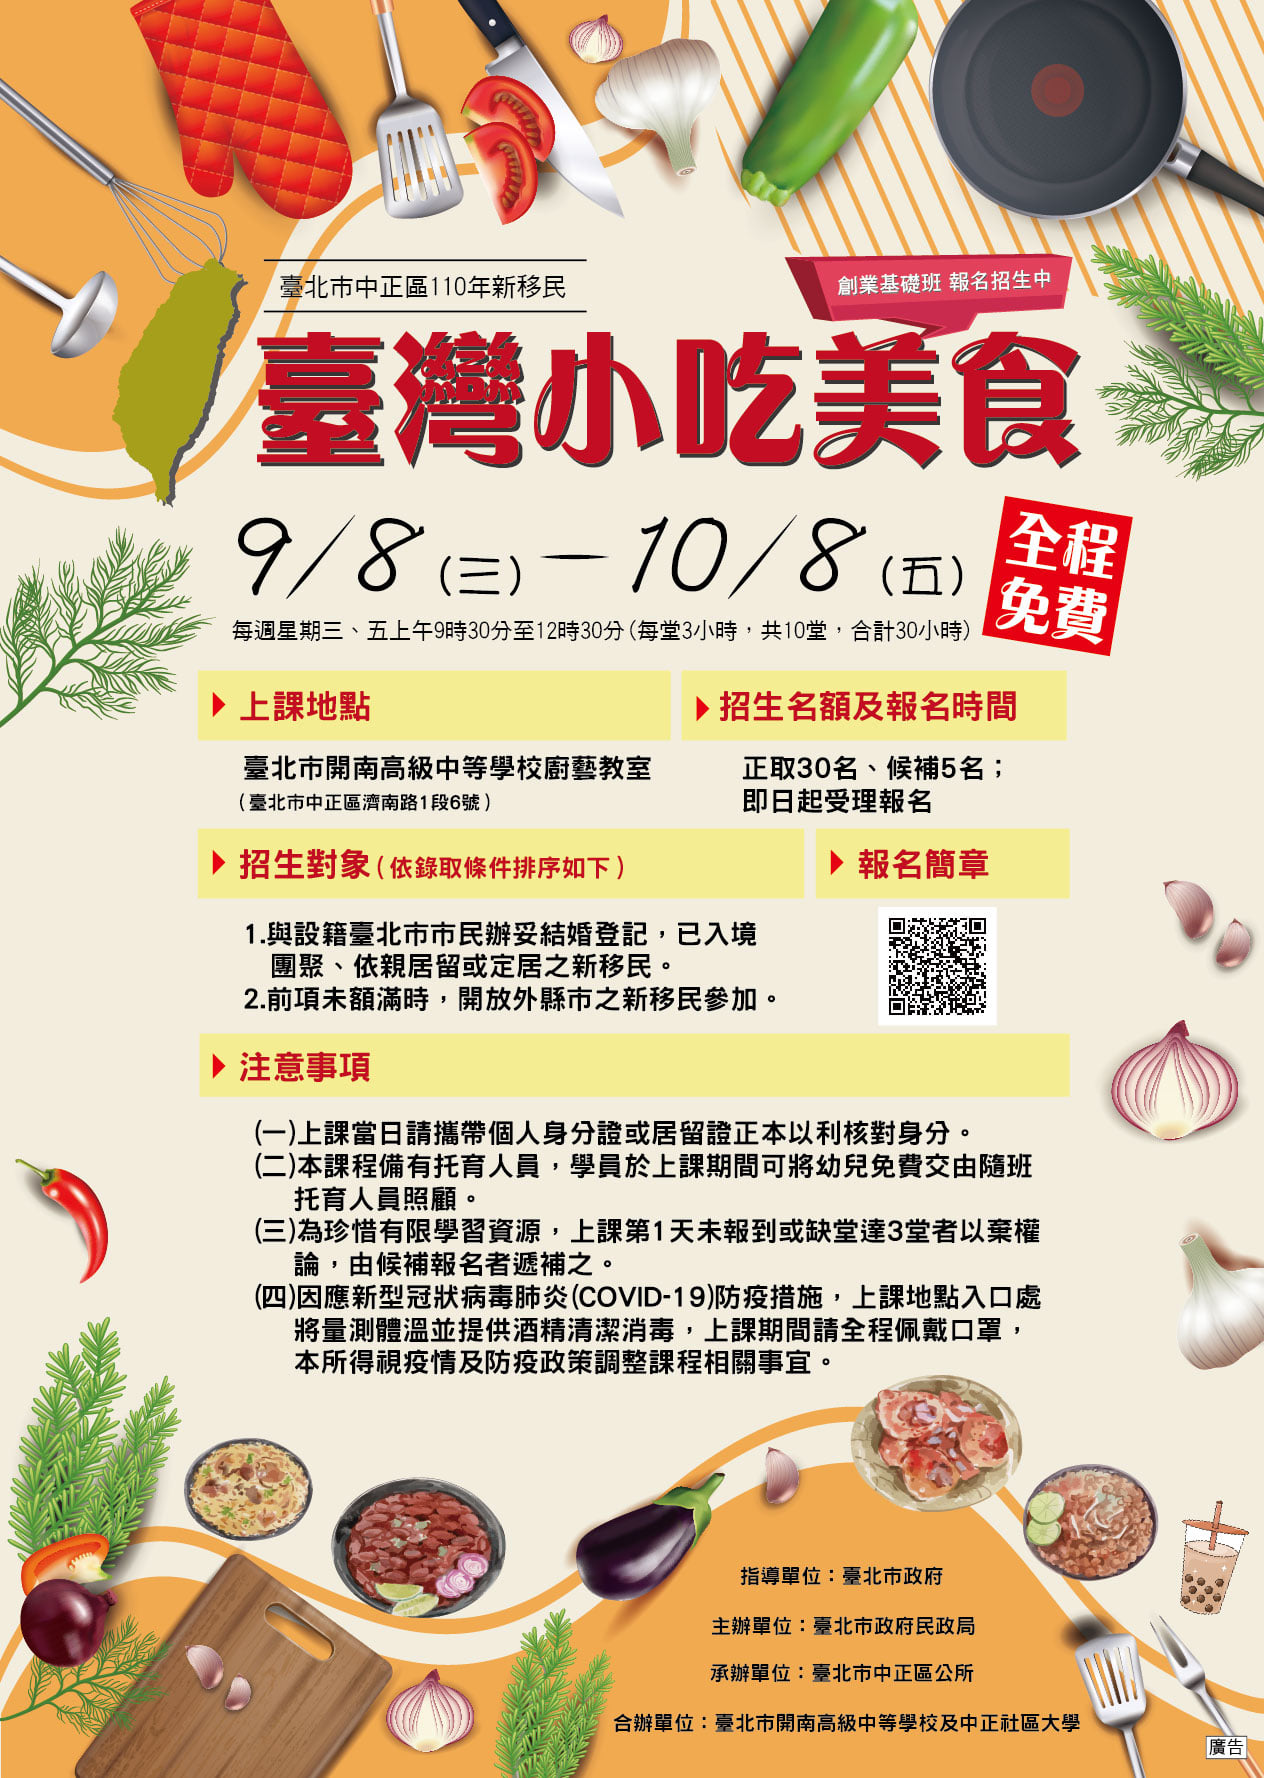 Event poster of "New Immigrants Taiwanese Food and Snacks Basic Entrepreneurship Class". (Photo/Provided by Taipei City Government)